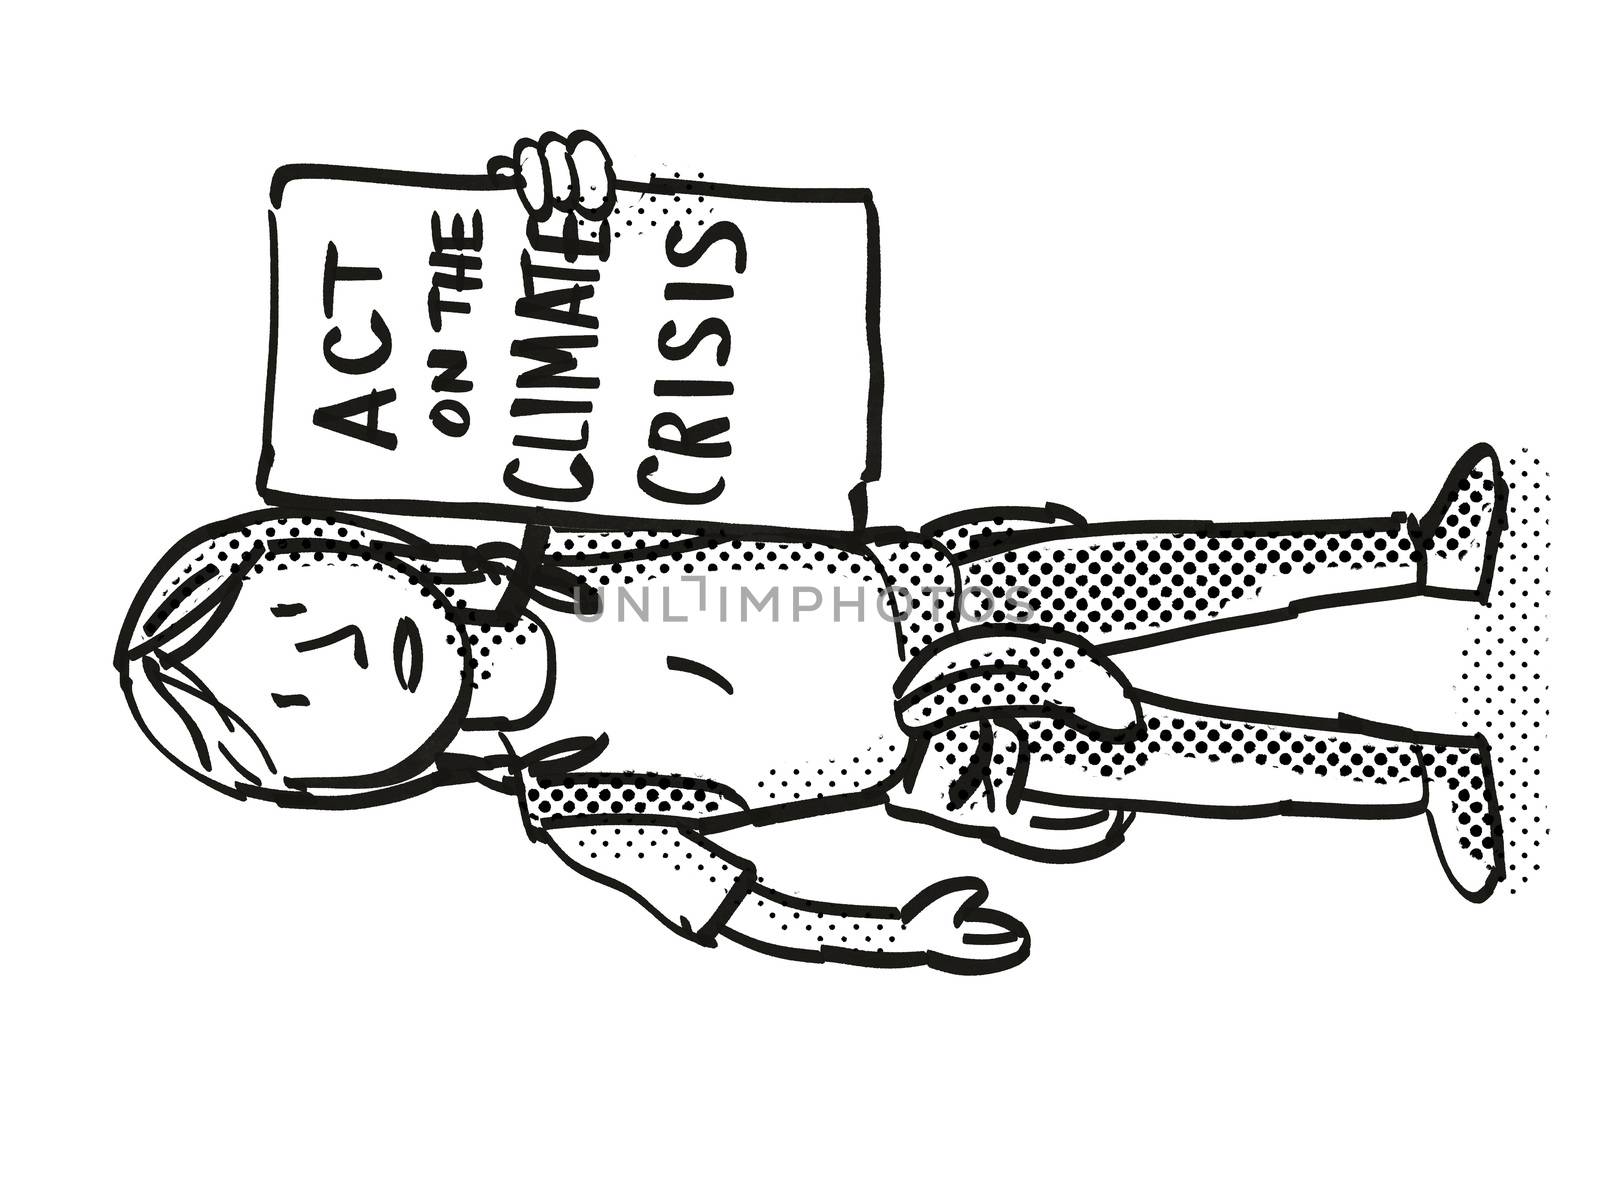 Cartoon style illustration of a young student or child with placard, Act on the Climate Crisis protesting on Climate Change in black and white on isolated background.